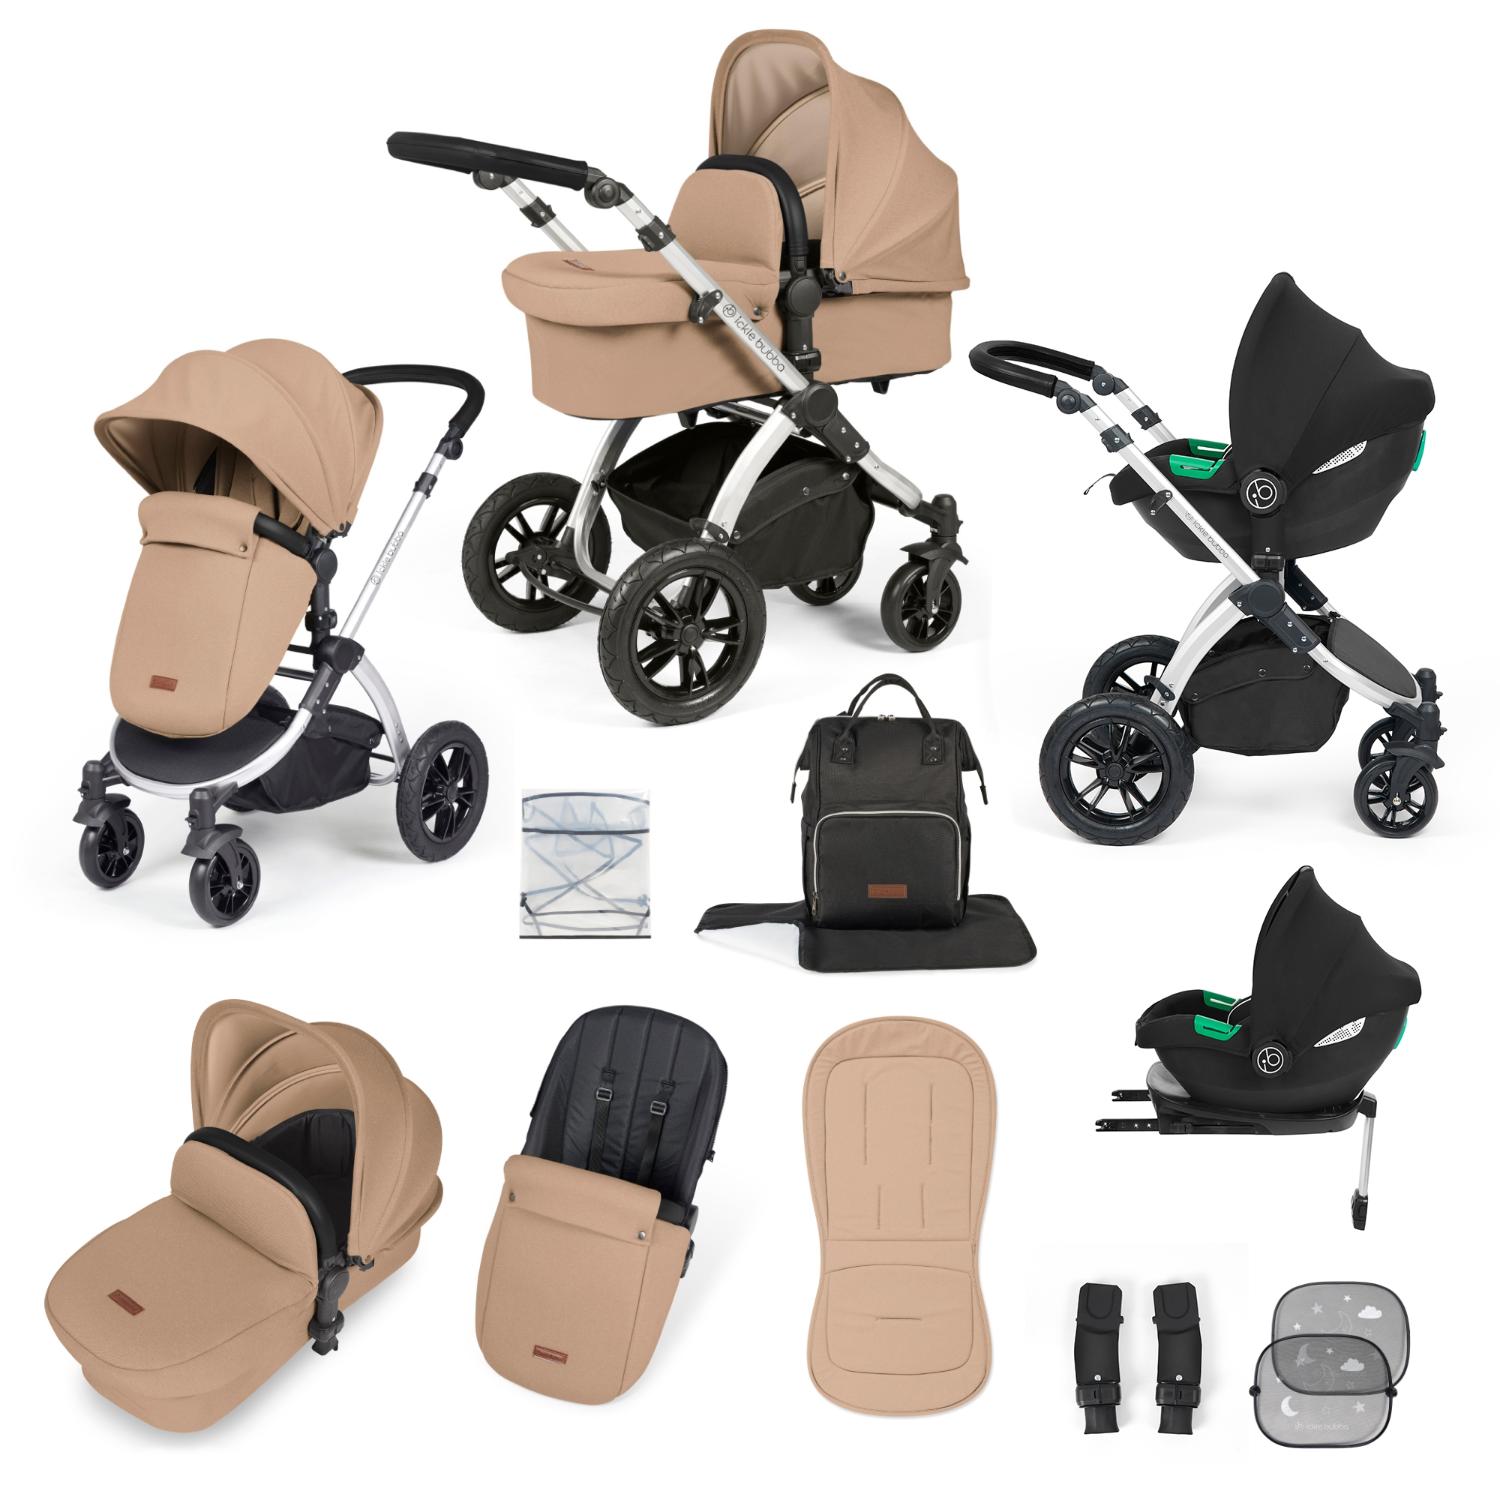 Ickle Bubba Stomp Luxe All-in-One Travel System with Cirrus i-Size Car Seat and ISOFIX Base and accessories in Desert beige colour with silver chassis